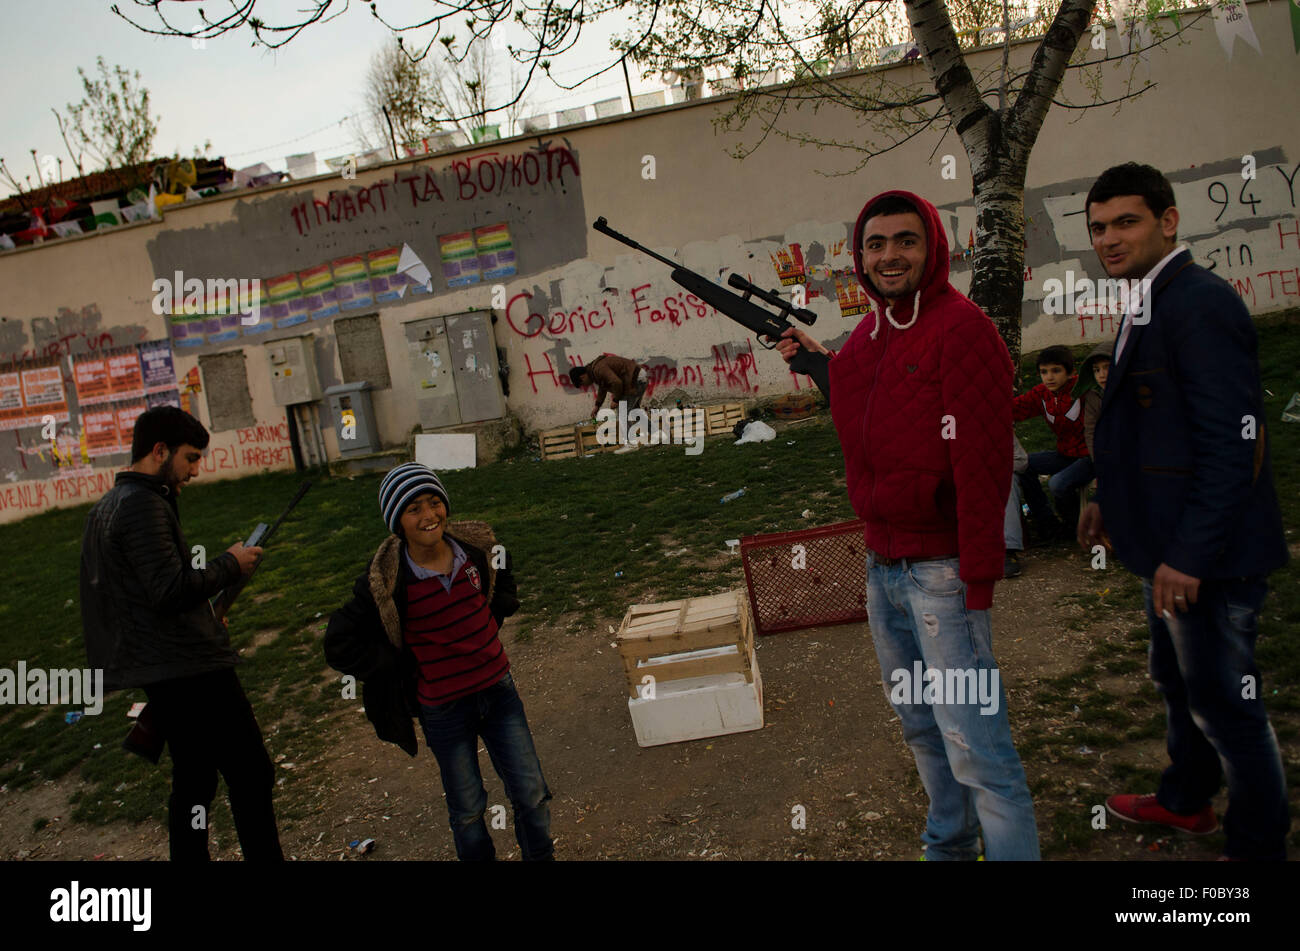 Shooting bottles in a park in Istanbul neighborhood of Okmaydani with walls covered in anti (government) AkP slogans Stock Photo